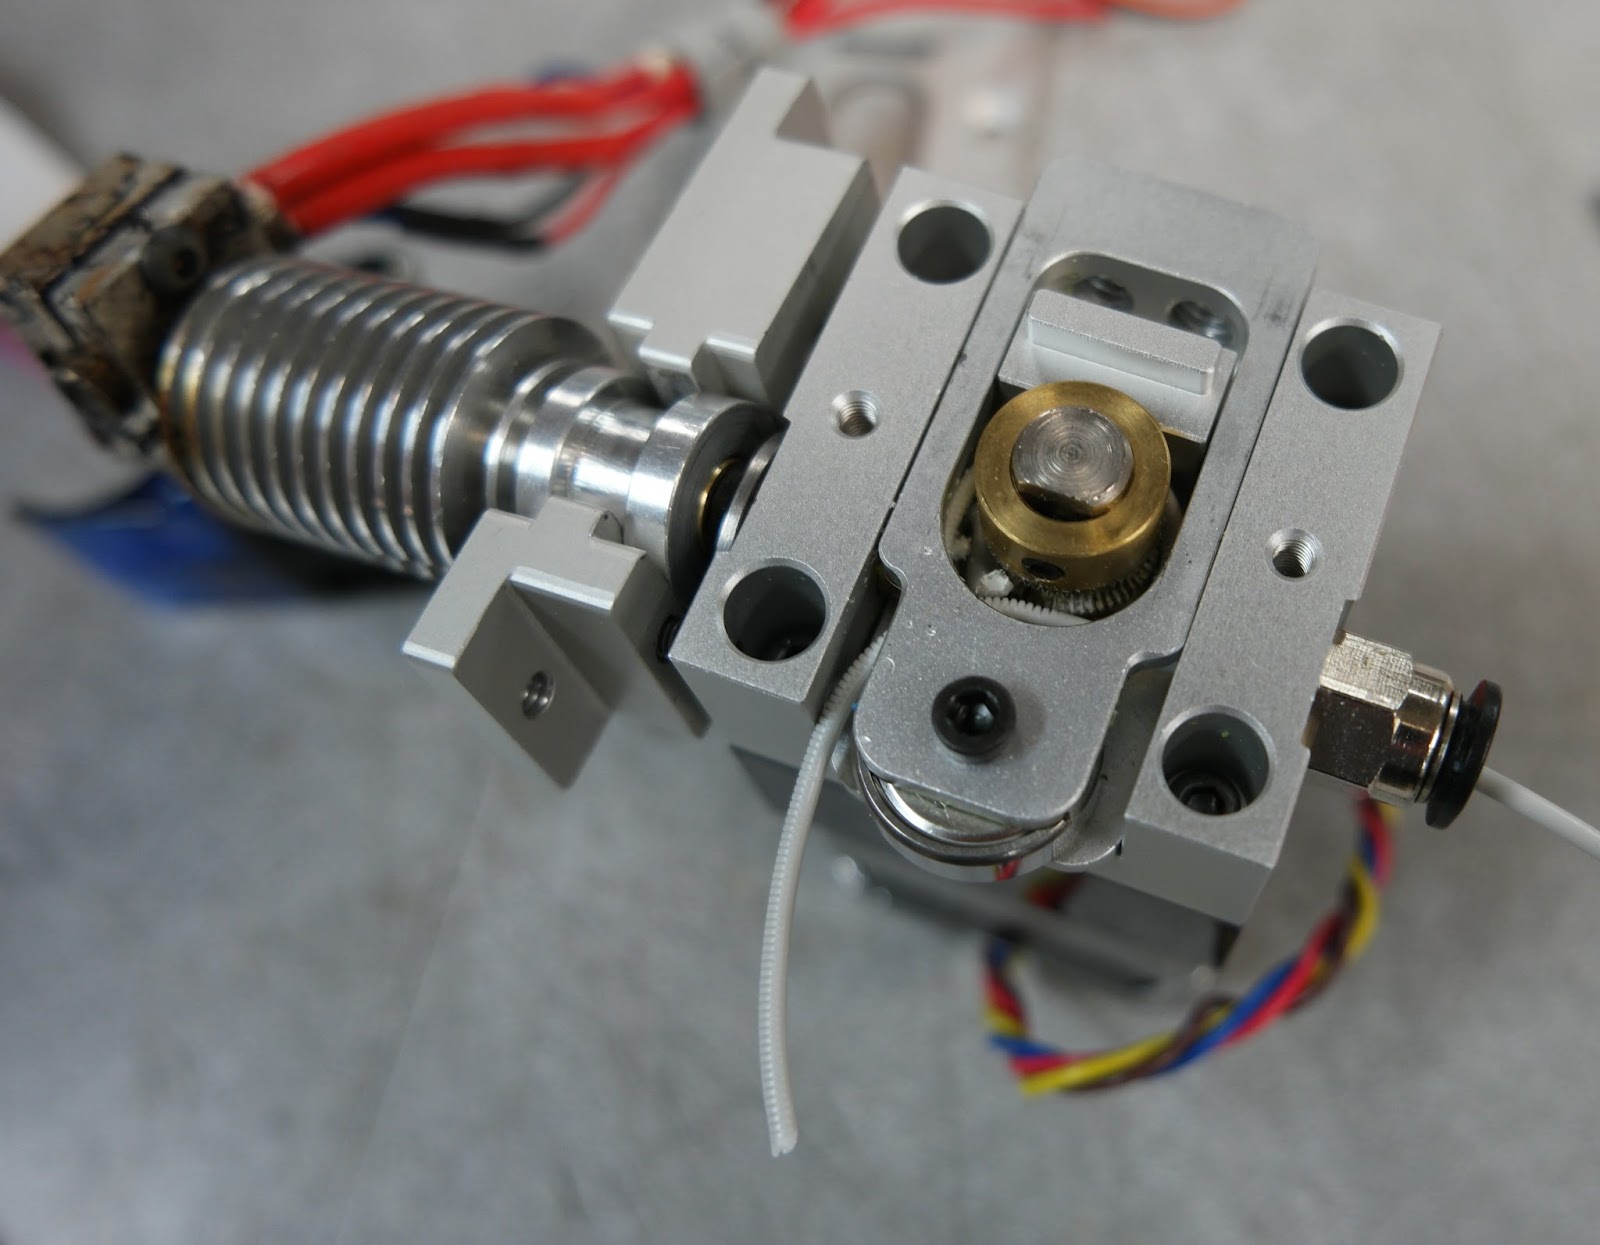 Mark Rehorst's Tech Topics: 3D Printer Hot-end and Extruder Designs - WrappeD